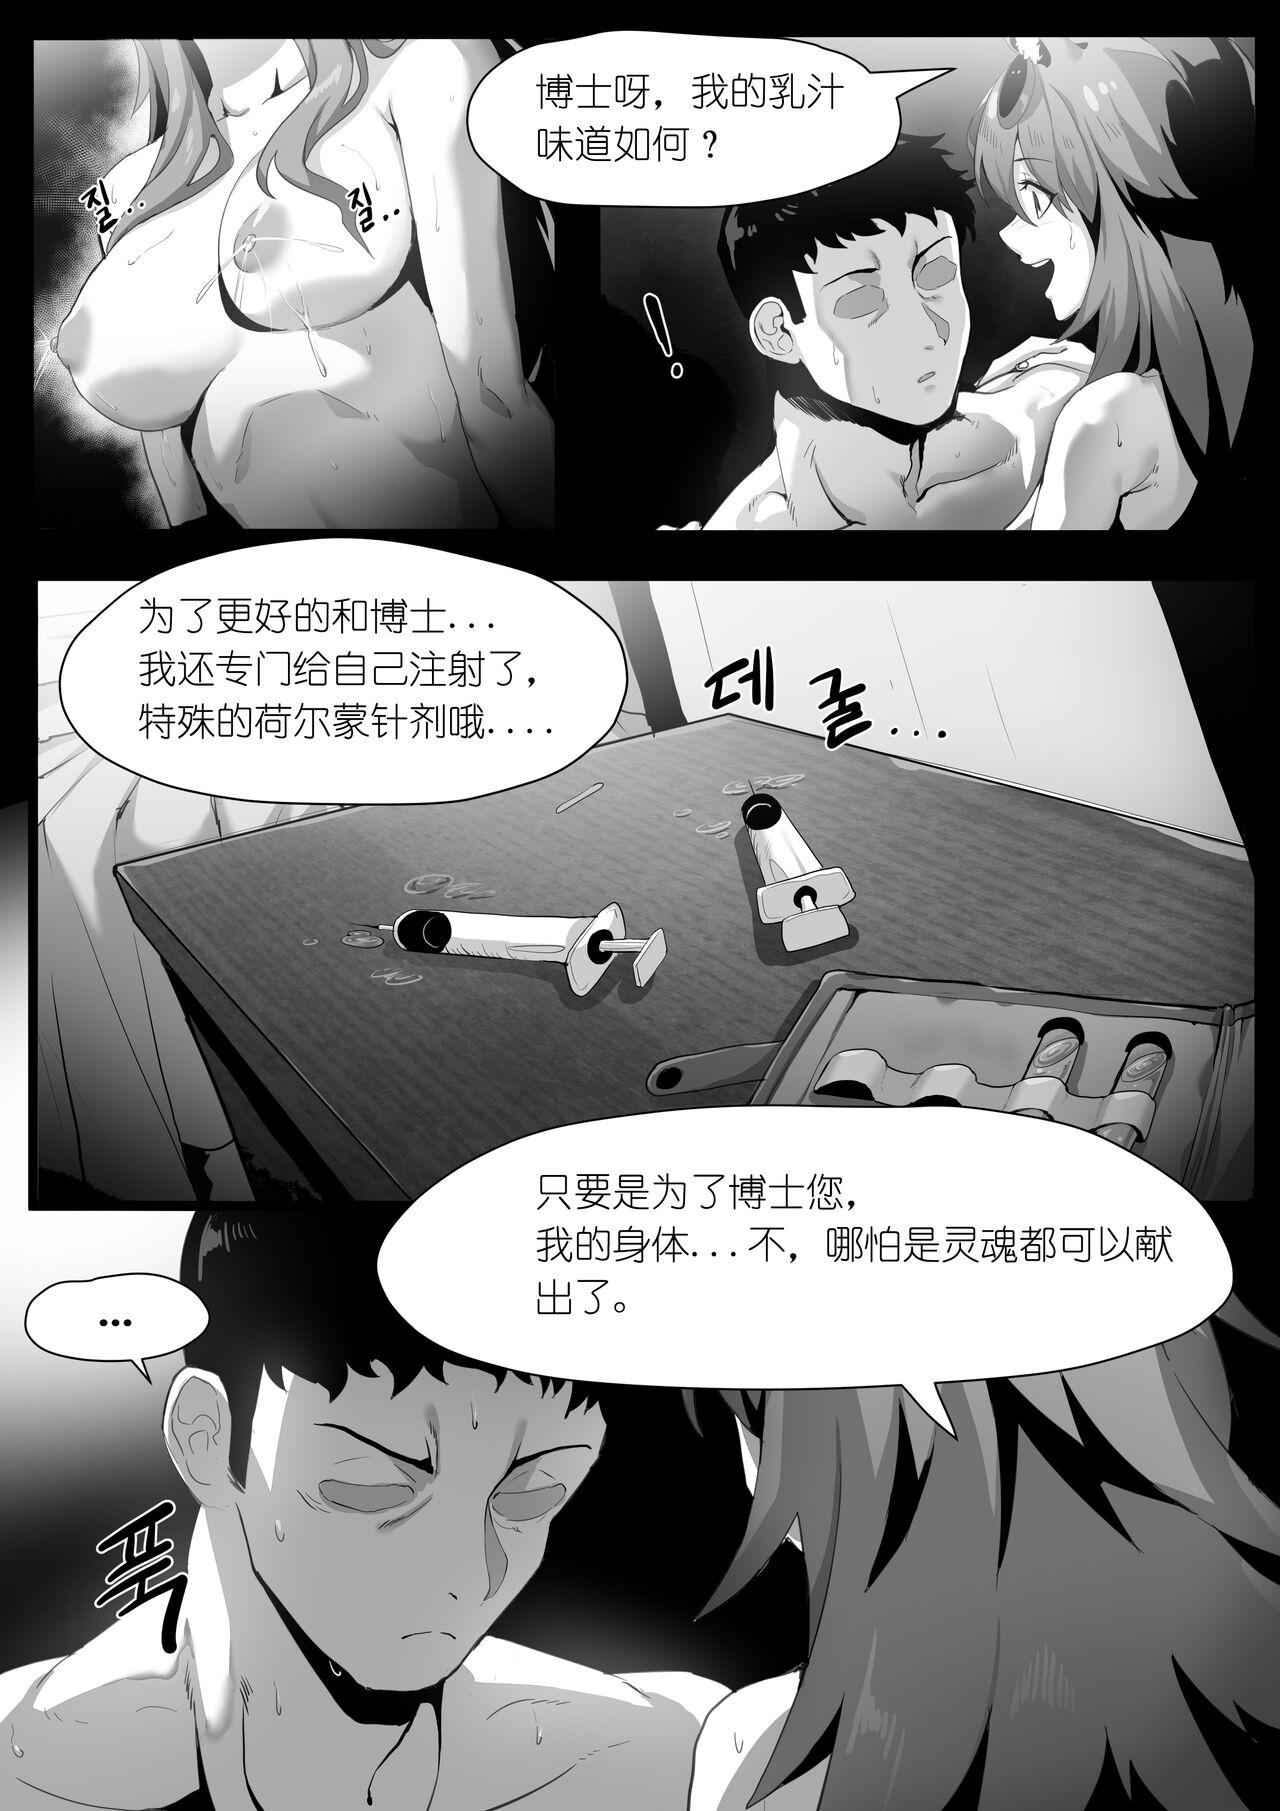 Blowing 欲望方舟记录3 - Arknights Blows - Page 4